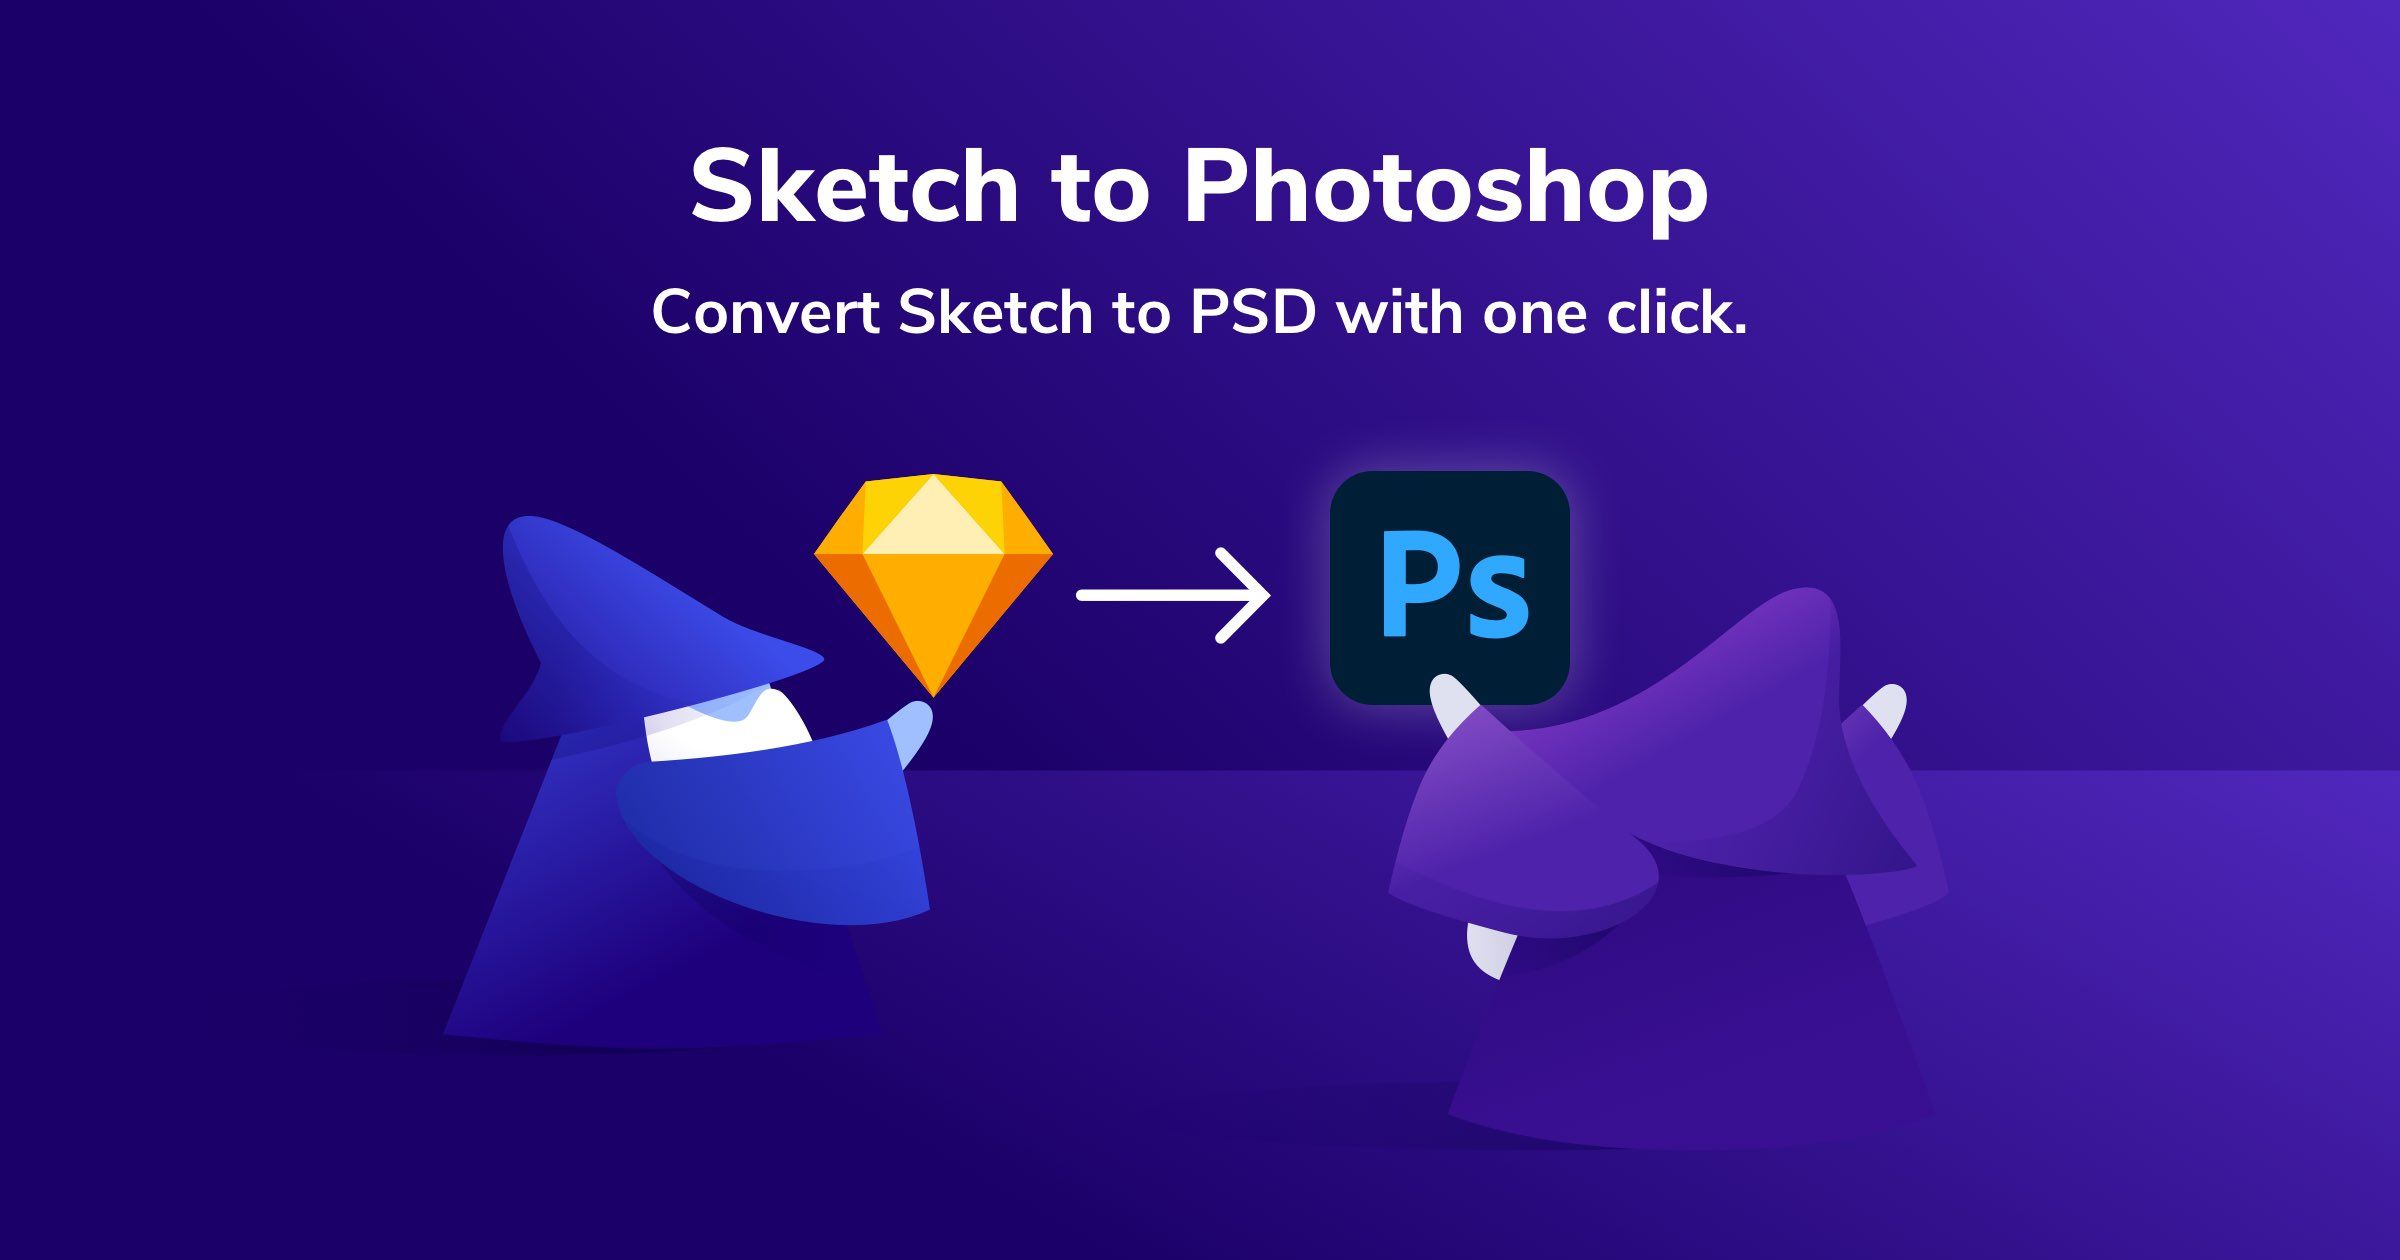 So Your Client Wants the Sketch File in PSD Format now  by Hanan AS  A  Song of Art  Science  Medium